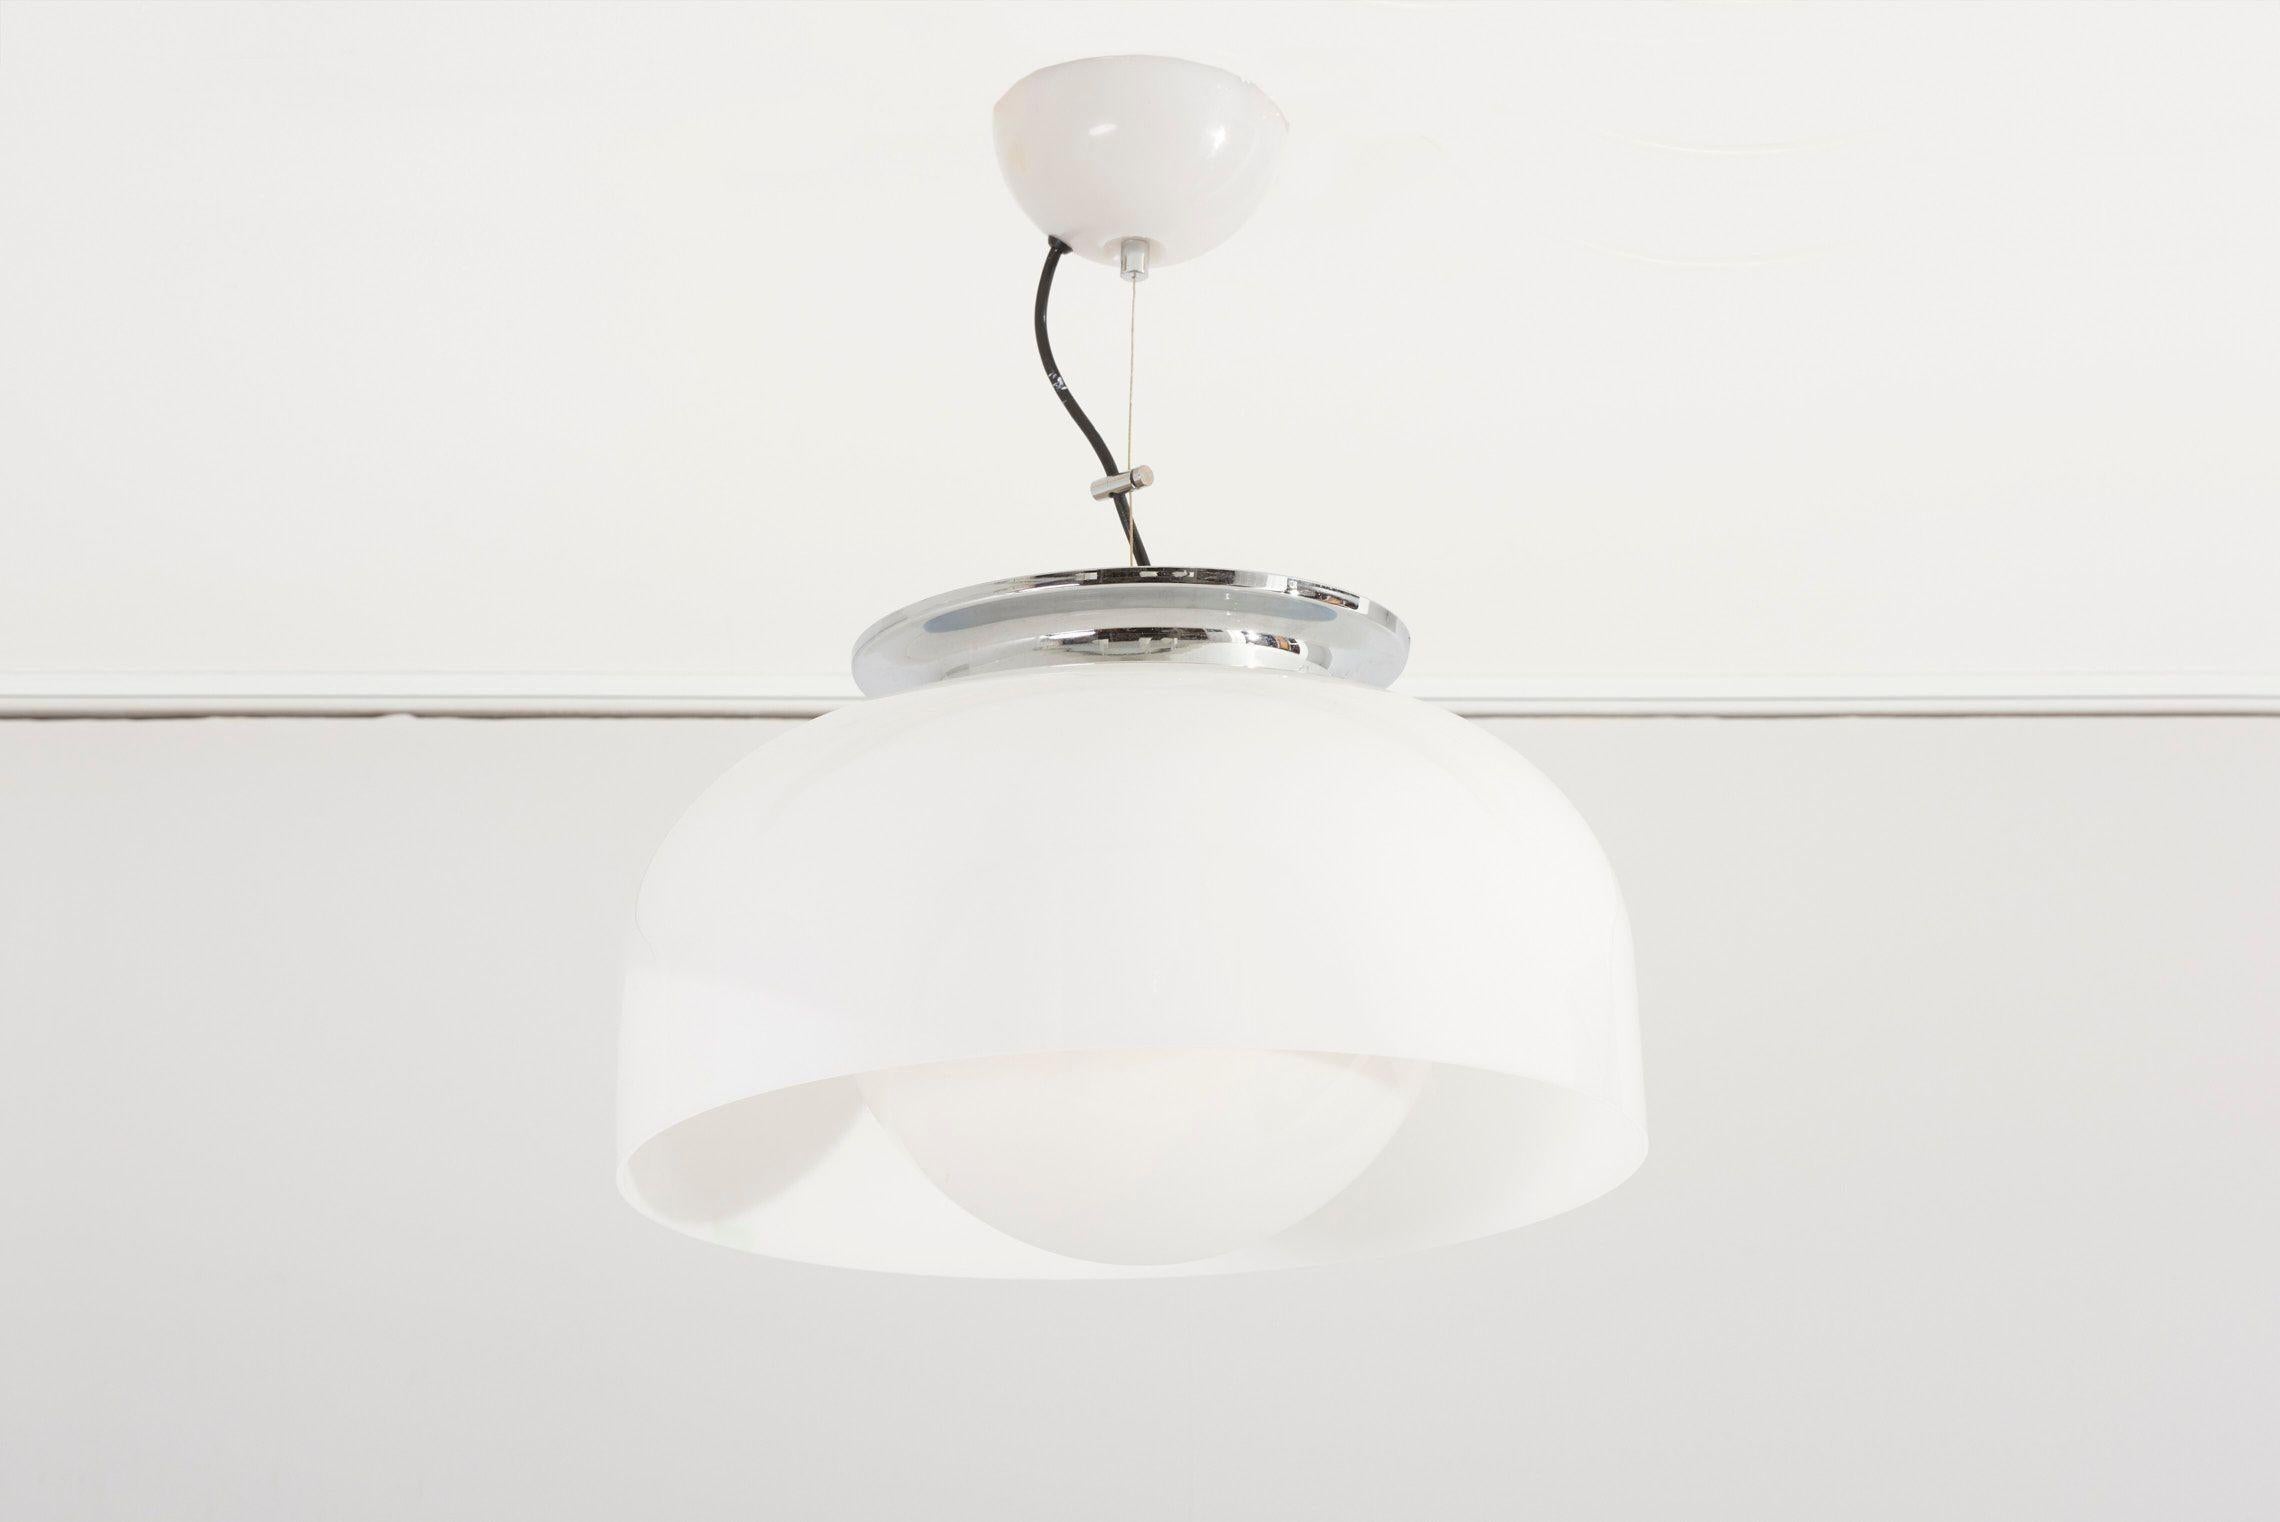 Pendant lamp by Luigi Massoni for Guzzini, Italy - 1970s. Chrome top on lucite shade. Socket: 1x E27. Please note: Lamp should be fitted professionally in accordance to local requirements.